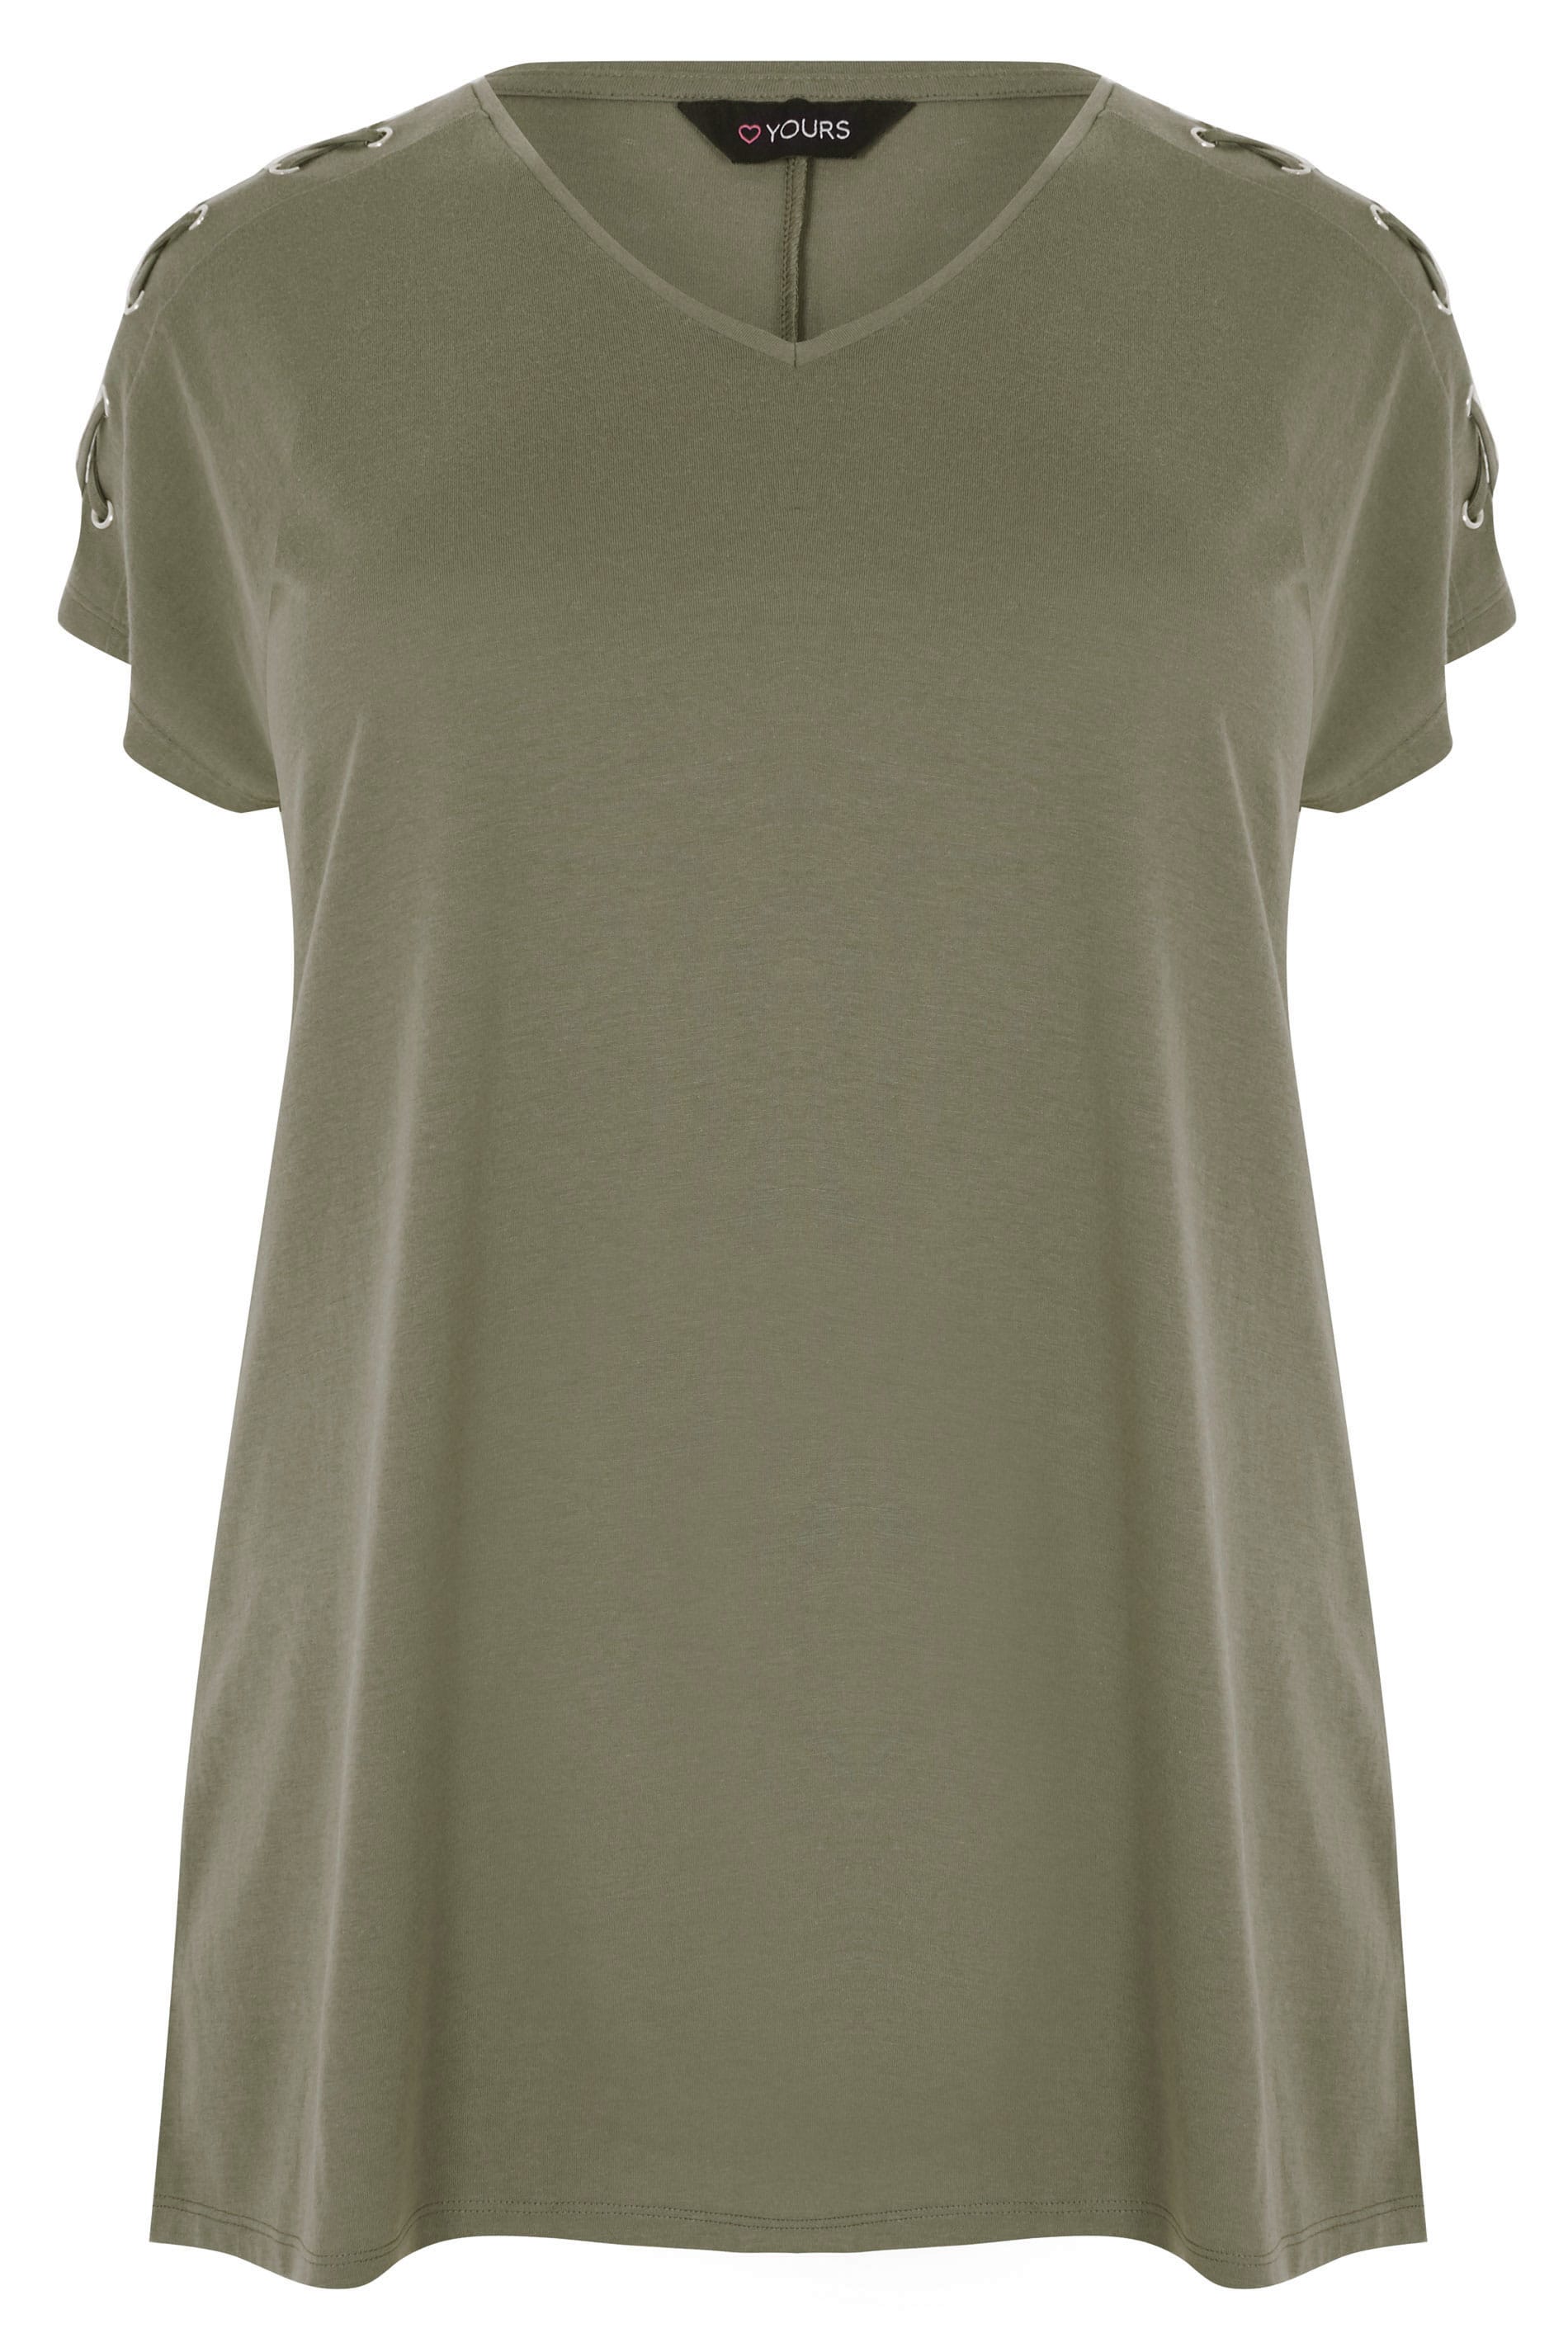 Khaki Jersey Top With Lace Eyelet Details, plus size 16 to 36